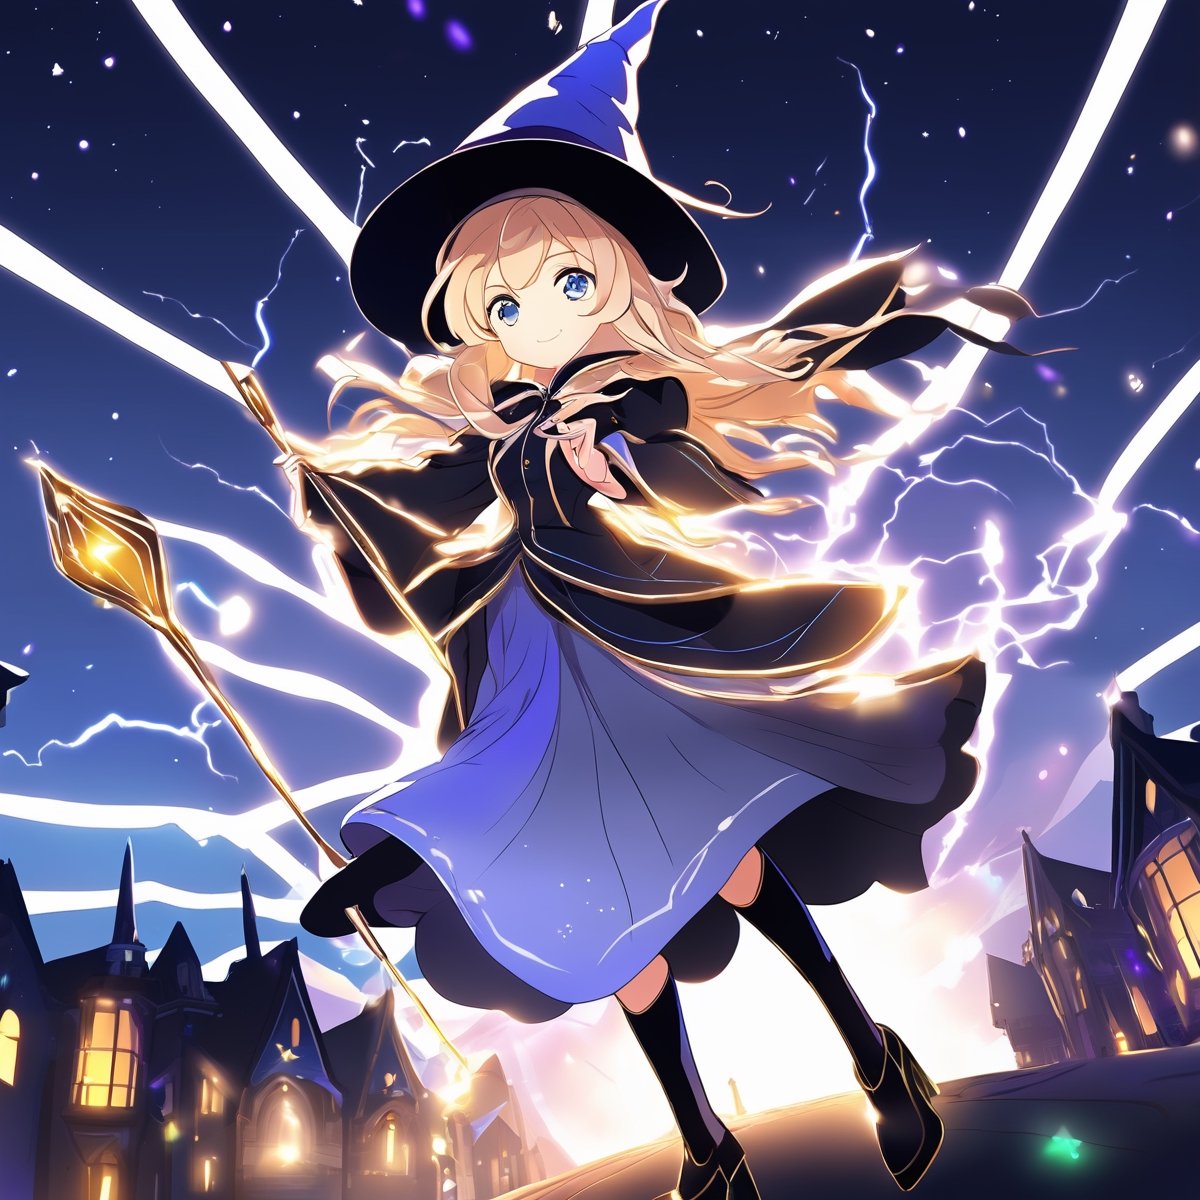 (dark background:1.33), start lights, full body, chibi, (18year old girl:1.5)), Anime SFW image, beautiful girl, slender figure, young adult, random poses, random angles, A composition that captures the whole body, detailed fan art, witch girl, splash art anime kawaii, bright witch, official artwork, witch hat commission, Cheerful, official fan art, cute art style, best quality, best light and shadow, glowing magical staff, white thigh high boots, brown duster jacket, white and gold dress, night view, weightless bouncing hair, 1 girl, anime style, (correct human anatomy:1.5), (one head, two ears, two eyes, one nose, one mouth, two arms, two hands, two legs, five fingers on each hands:1.33), small face features, large expressive eyes, small nose, thin lips, small chin, soft hands, (realism: 1.2), petite, bangs, (trace the contour with detailed intricate white thin lined crackling shimmering vibrant lightning:1.3), (glowing:1.1), (shimmer and twinkl:1.2), luminism, breathtaking fusion of light, indelible impression, high quality, masterpiece, swirling luminescent ribbons, black stockings (halloween theme:1.15), 